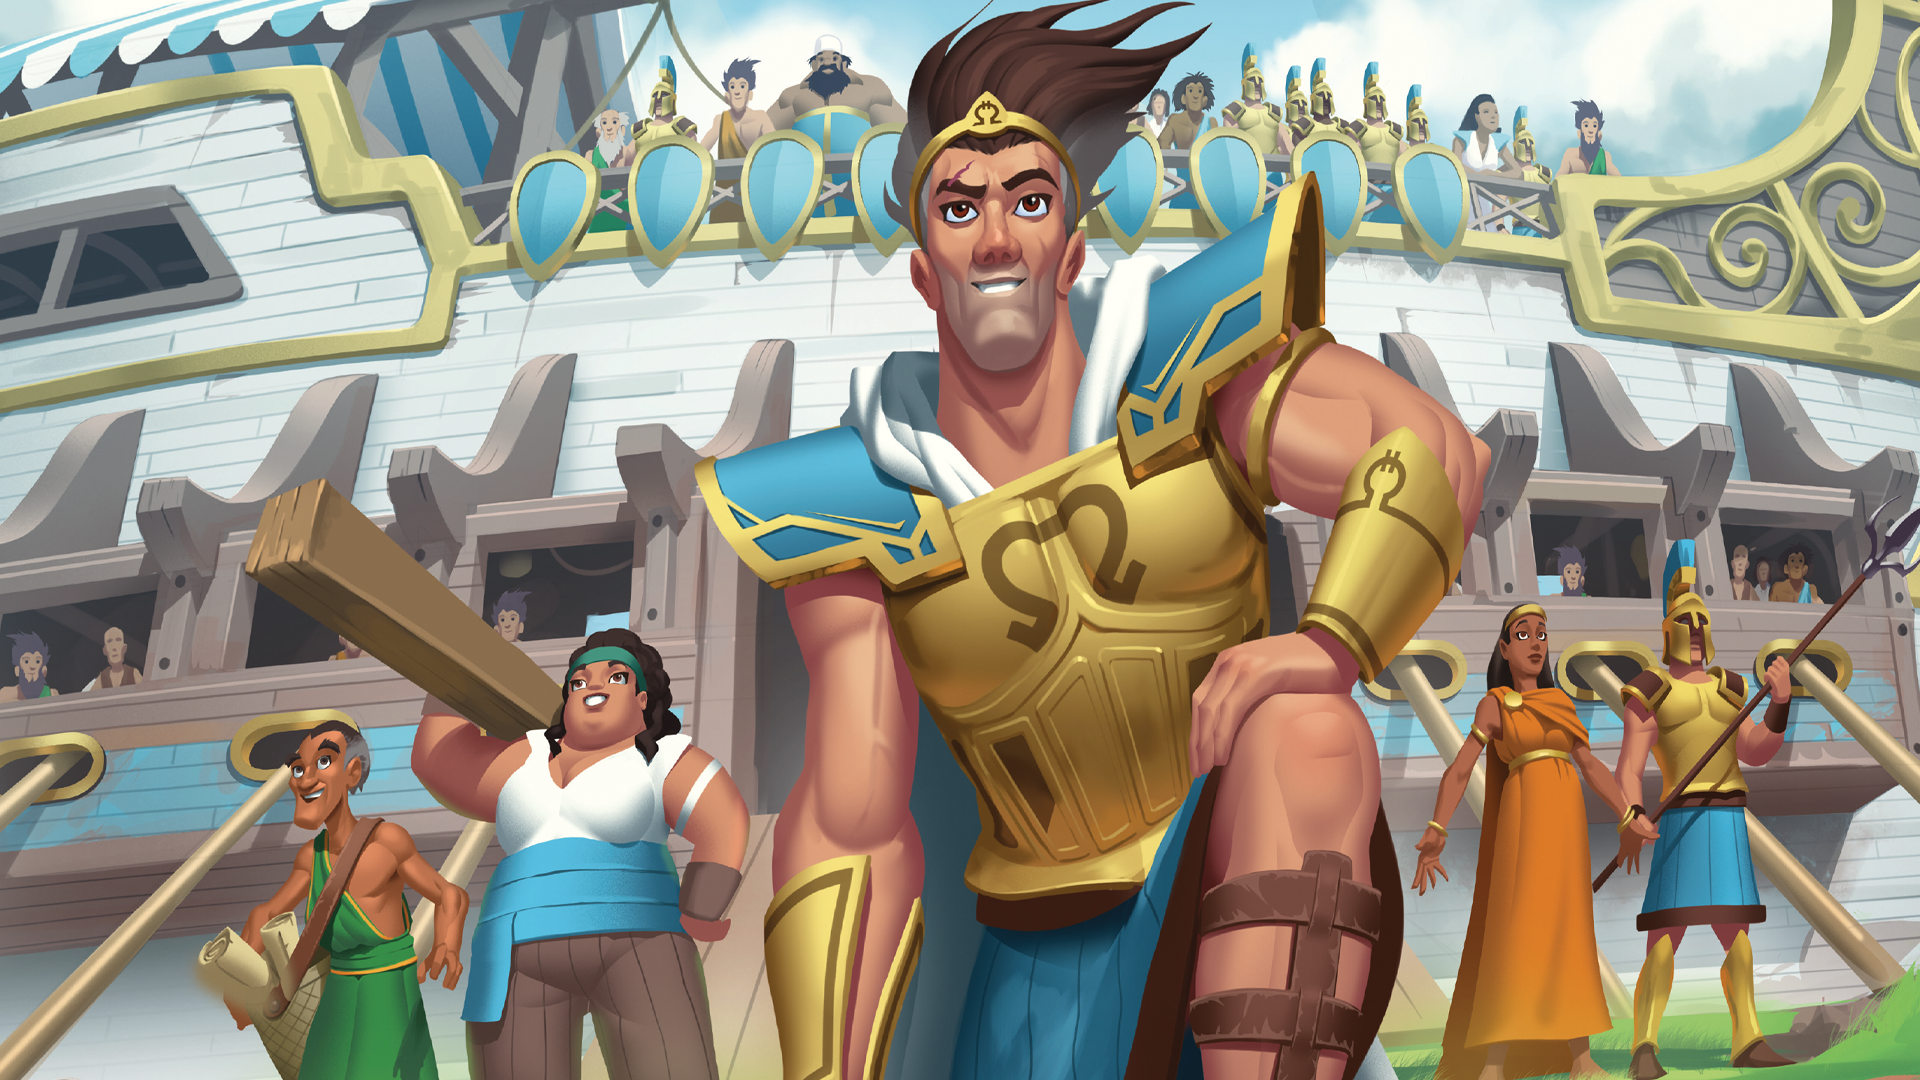 The artwork for the Orichalcum board game.